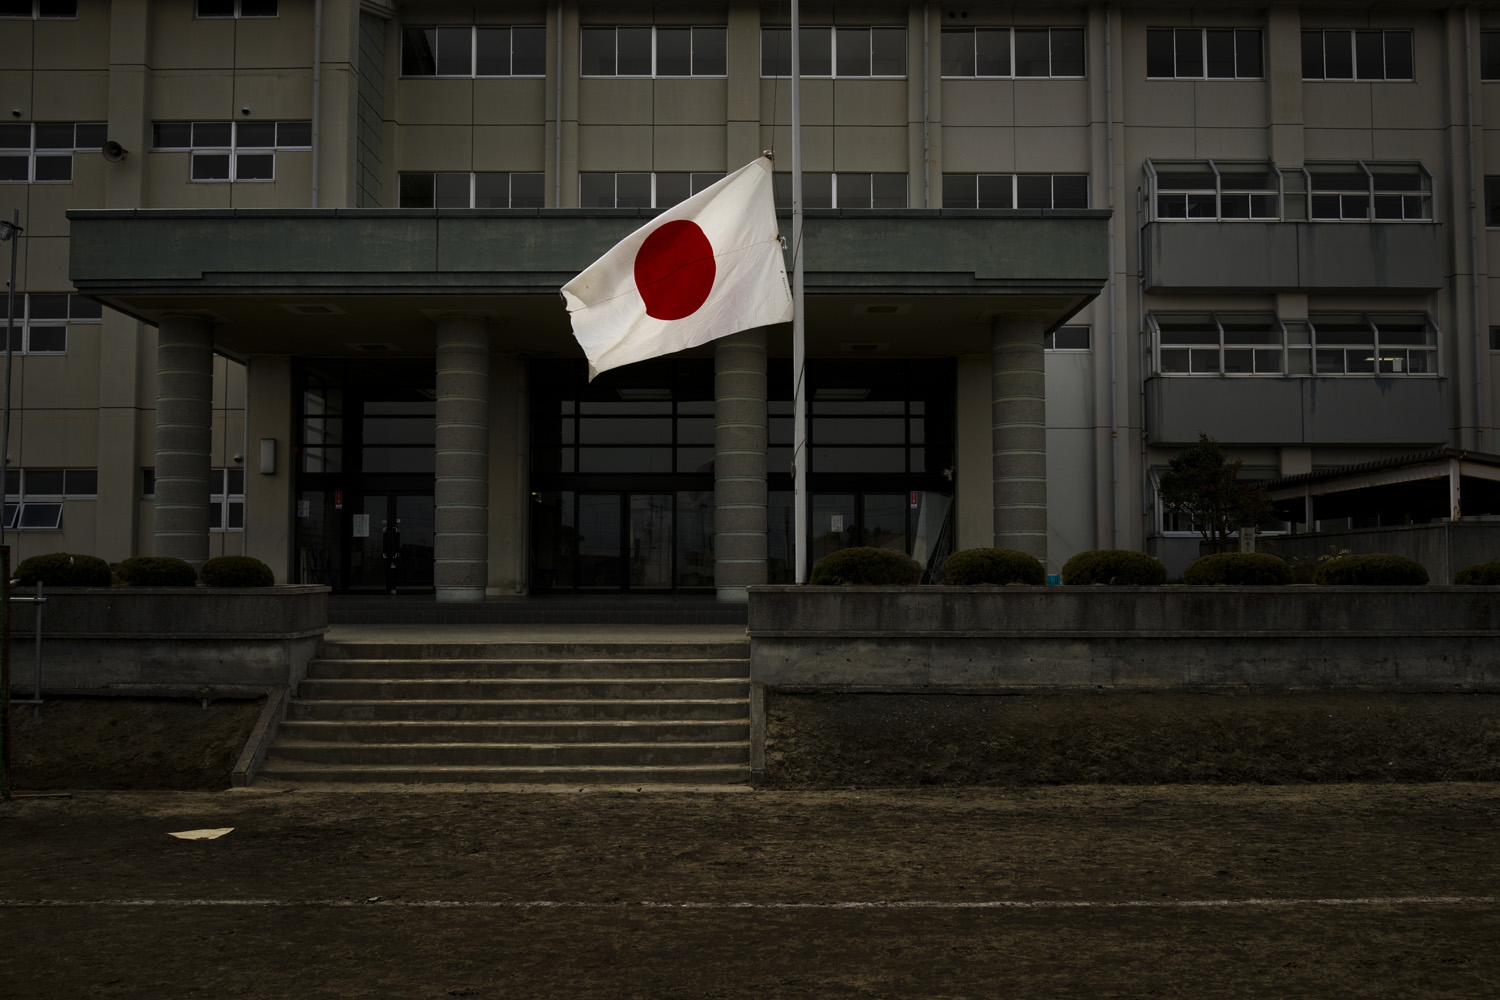 Japan, Minamisoma, 2014.
                              A Japanese flag flies half-mast at a school on the third anniversary of the earthquake and tsunami that hit the northeastern coast of Japan on March 11th 2011. The school is approximately 30 kilometers from the damaged Fukushima Daiichi Nuclear Power Station. Many original residents have returned to their homes despite the  high levels of radiation recorded in the area and the effect that exposure to it may have on their health.